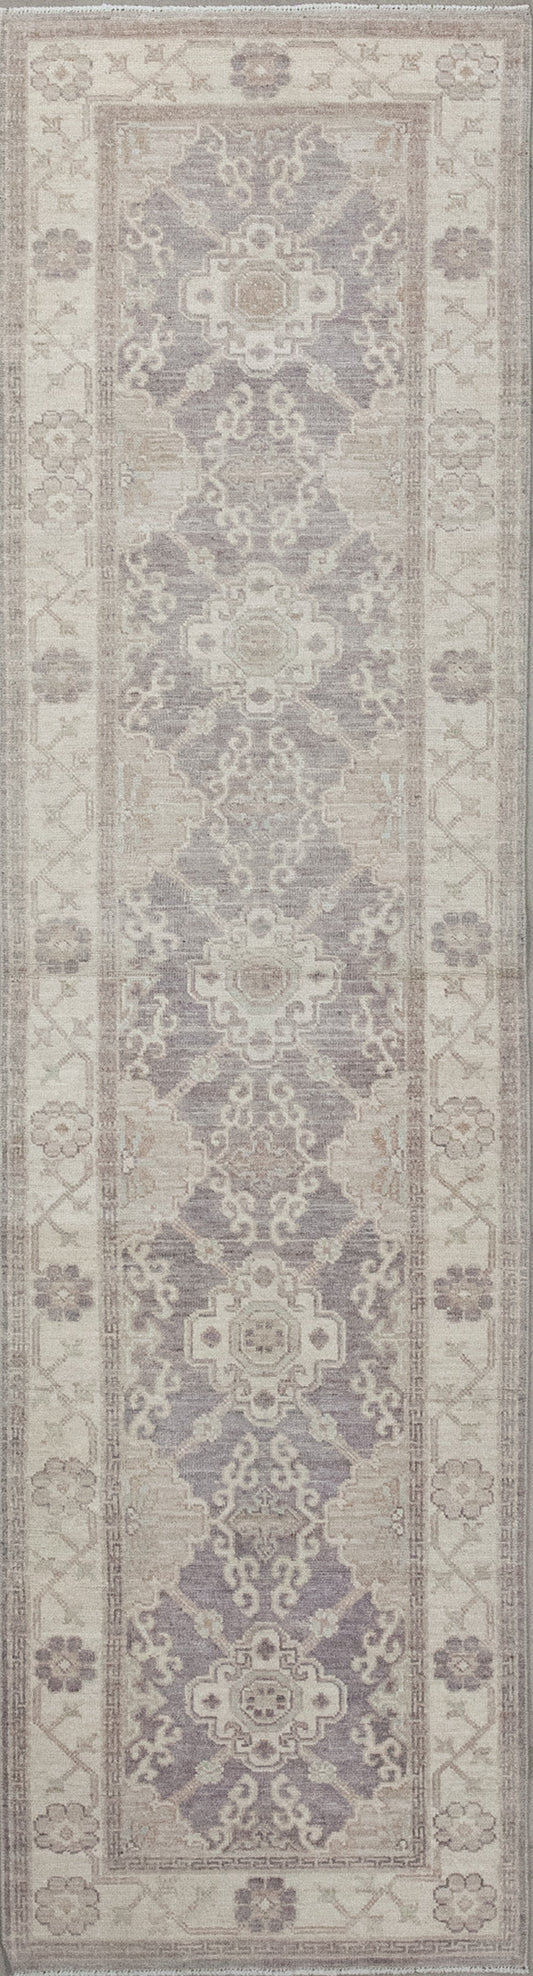 Traditional carpet comes with a conservative color scheme which has brown, beige, and gray. 